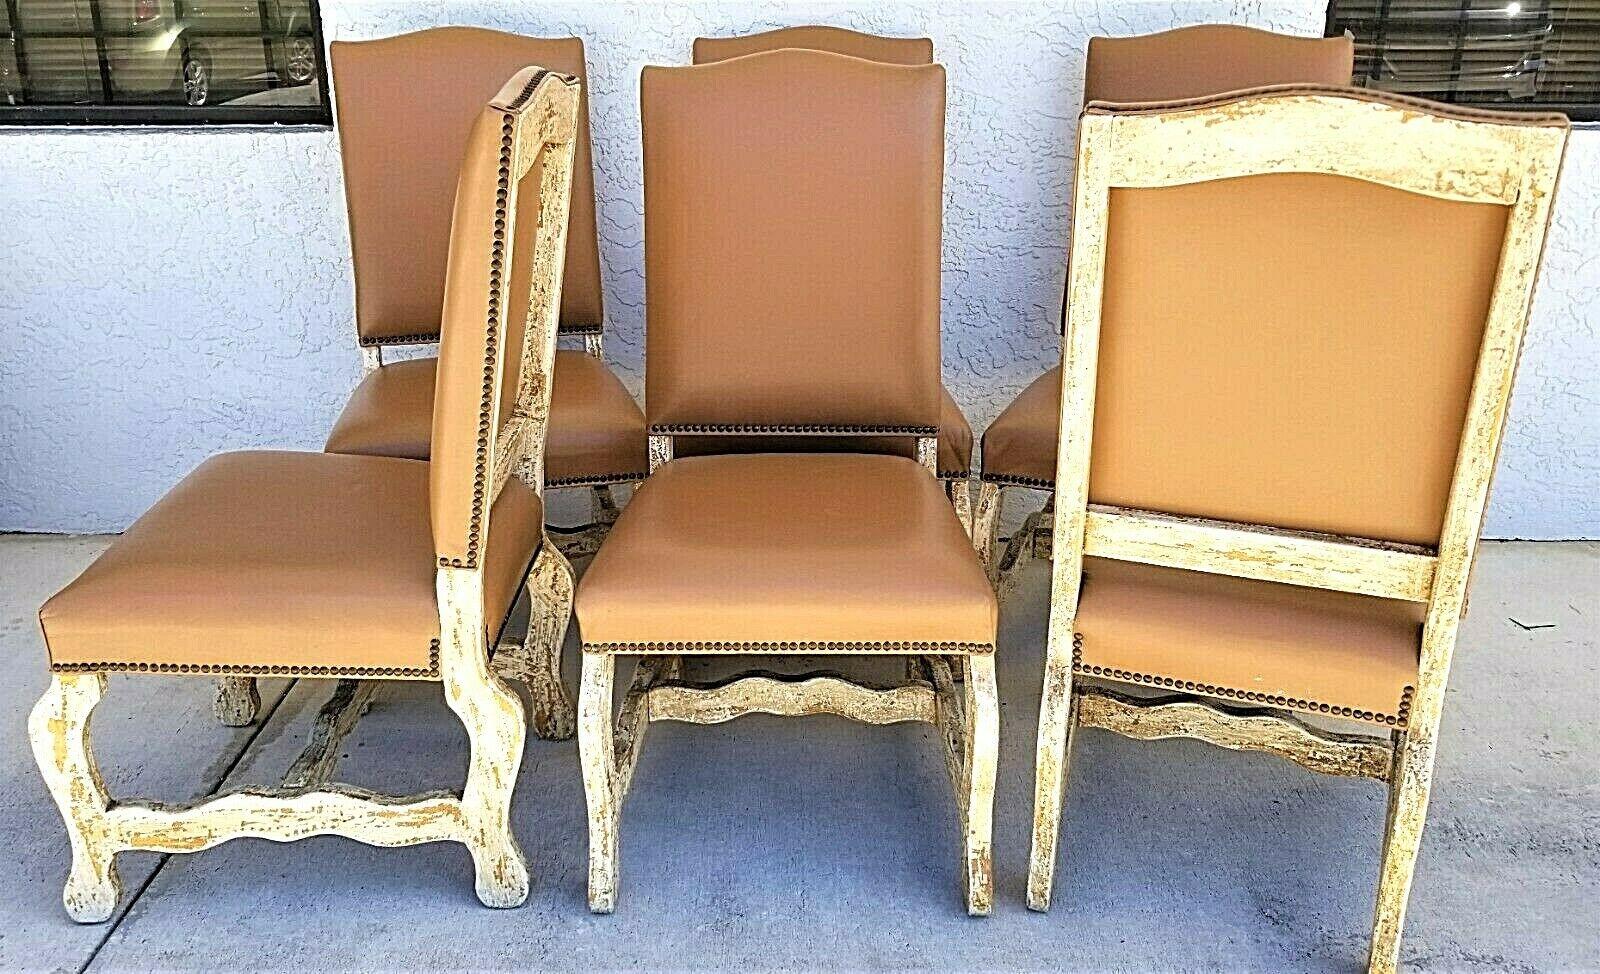 Offering One Of Our Recent Palm Beach Estate Fine Furniture Acquisitions Of A 
Set of (6) Genuine Leather Wood Dining Chairs with Brass Nail Trim

Approximate Measurements in Inches
43